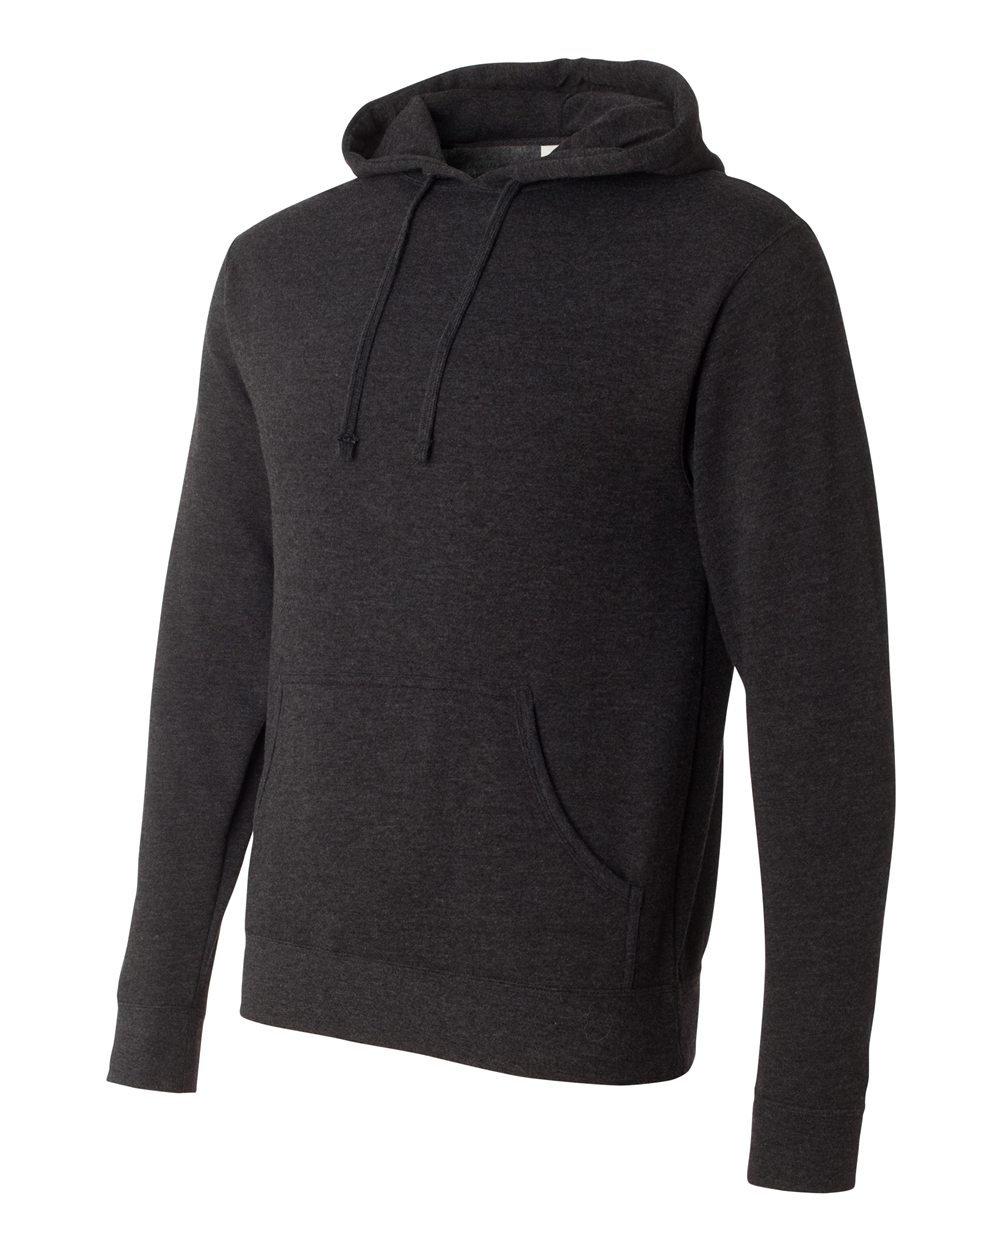 Independent Trading Co. AFX4000 | Hooded Sweatshirt | ShirtSpace